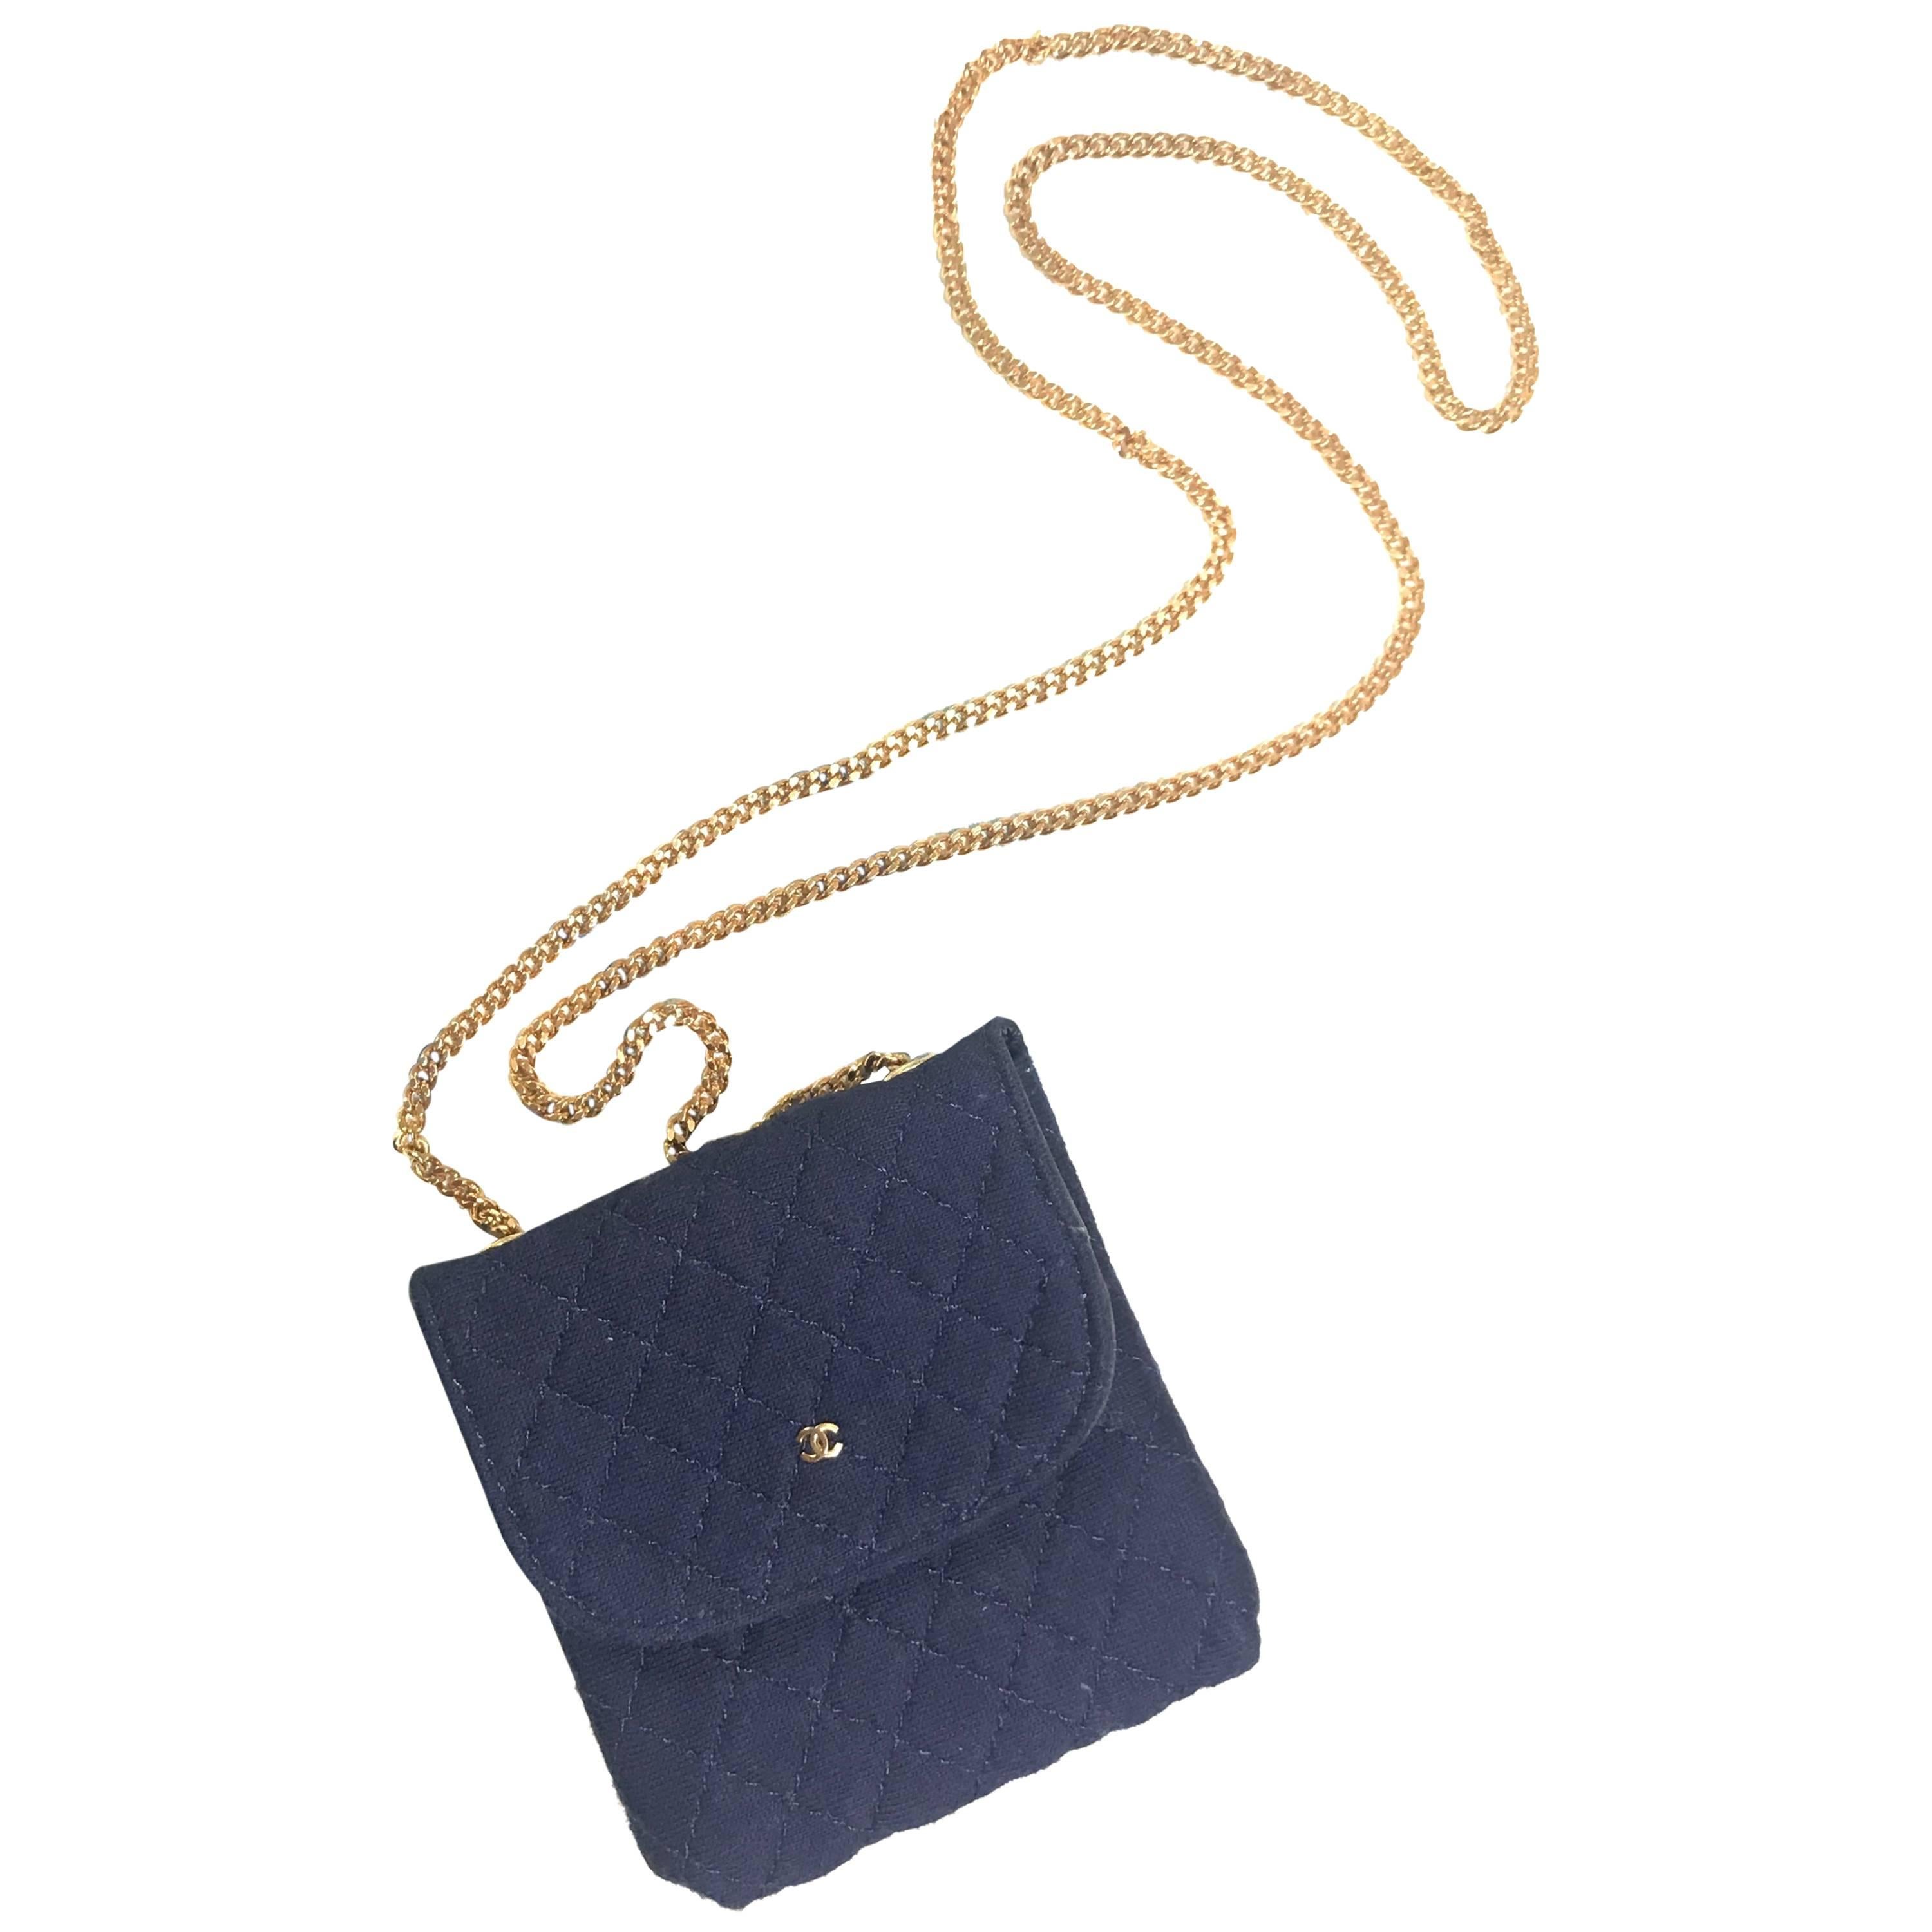 MINT. Vintage Chanel navy quilted jersey mini pouch, coin purse, long necklace.